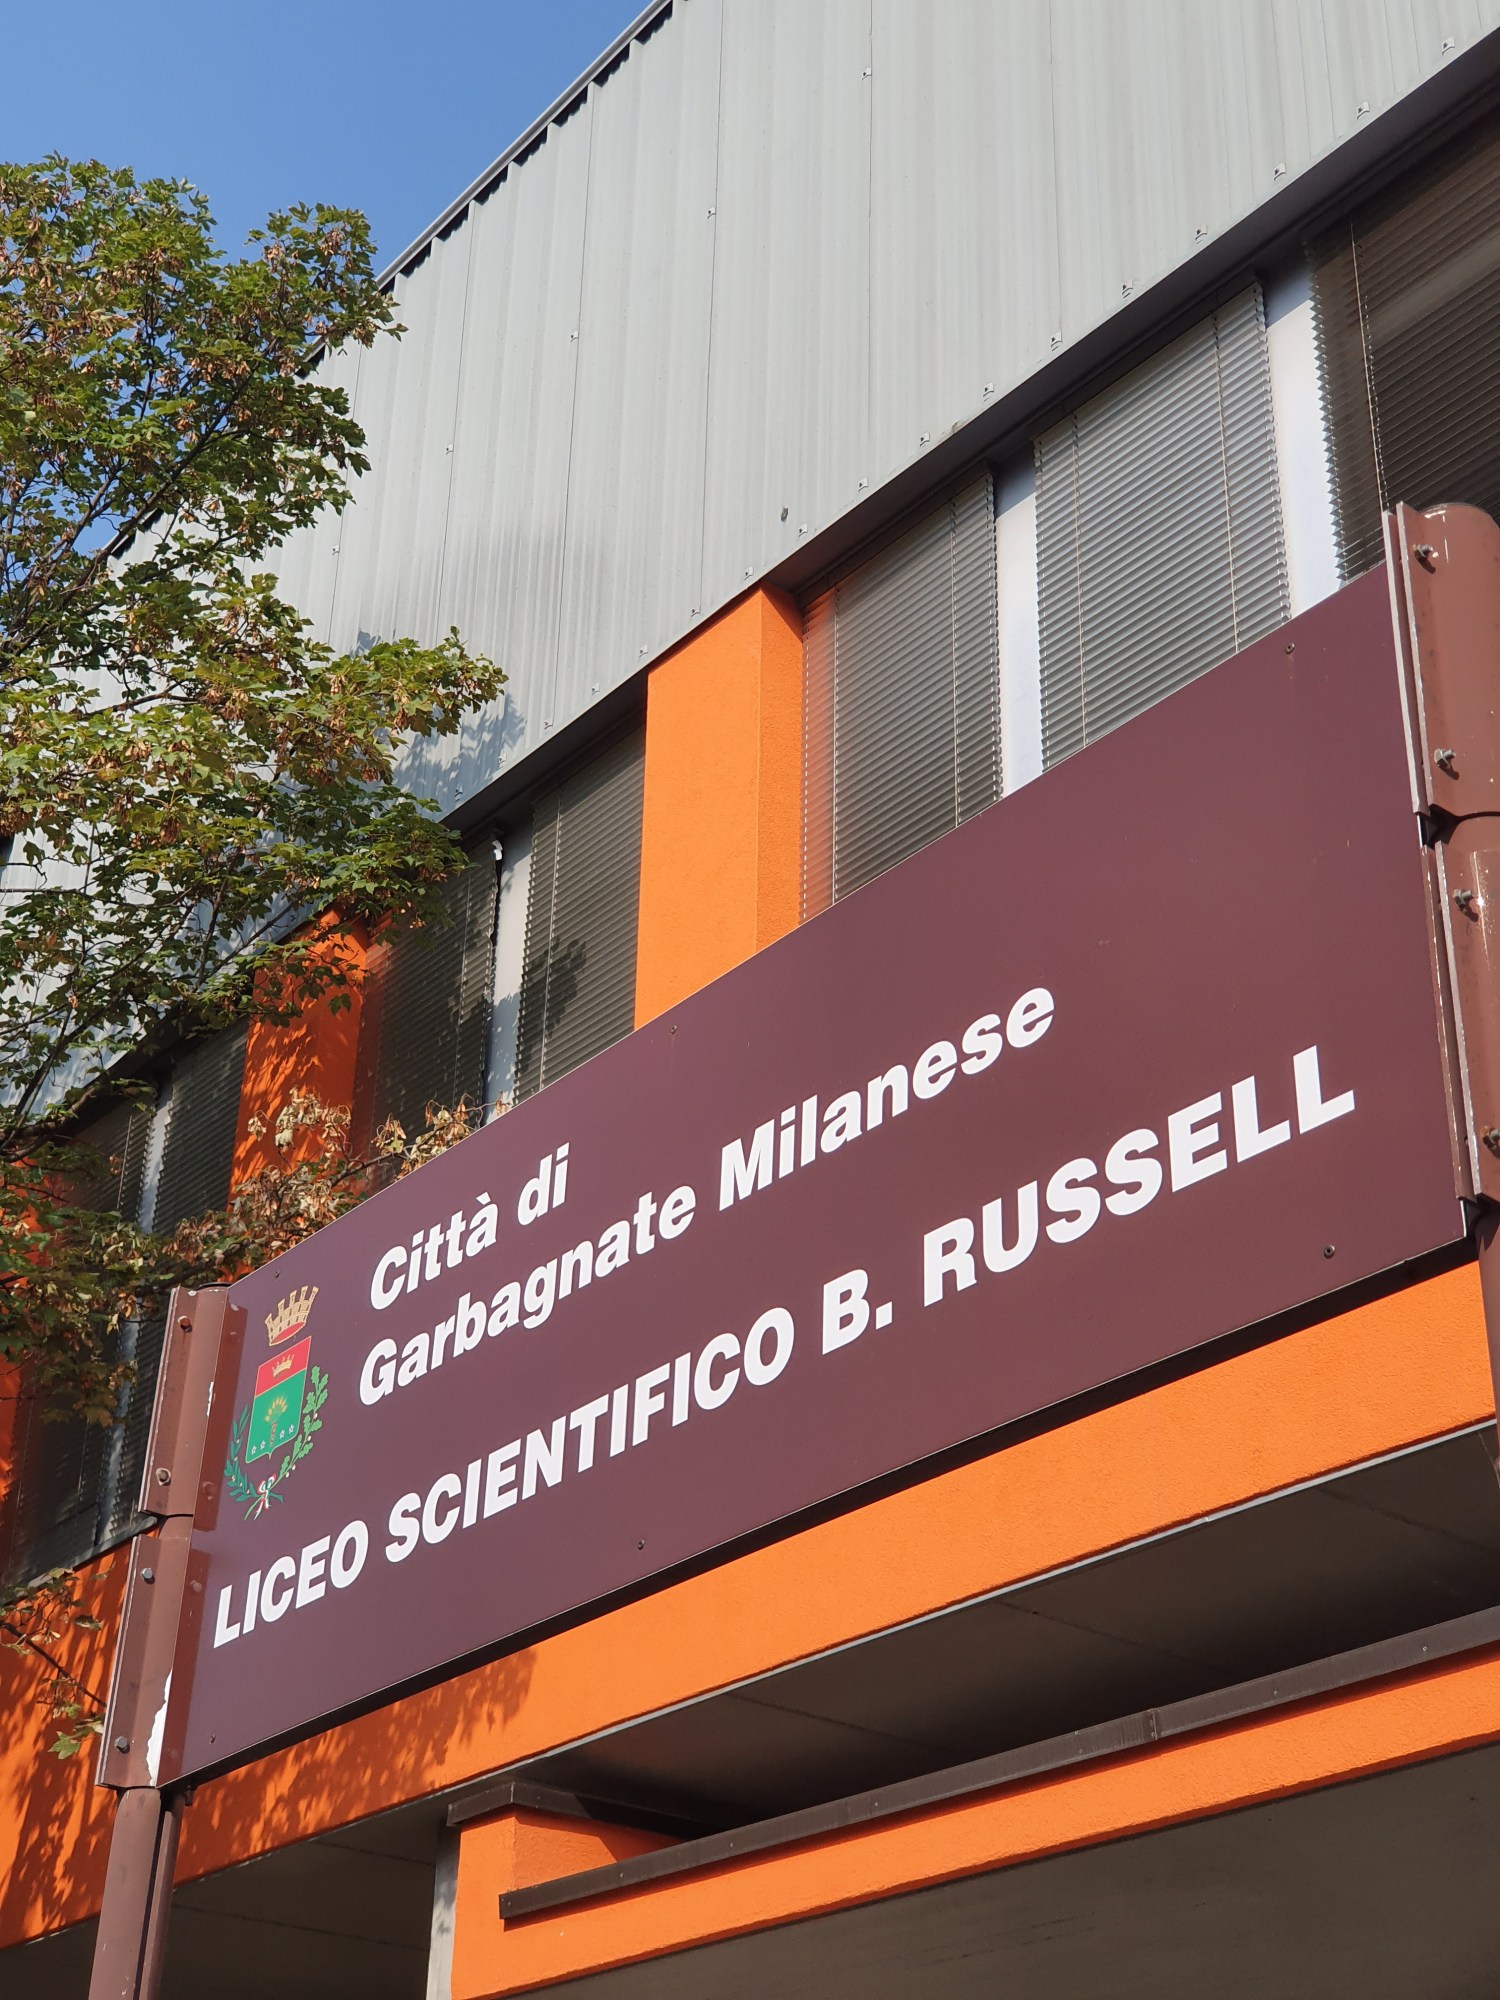 LICEO LINGUSTICO BENTRAND RUSSELL 